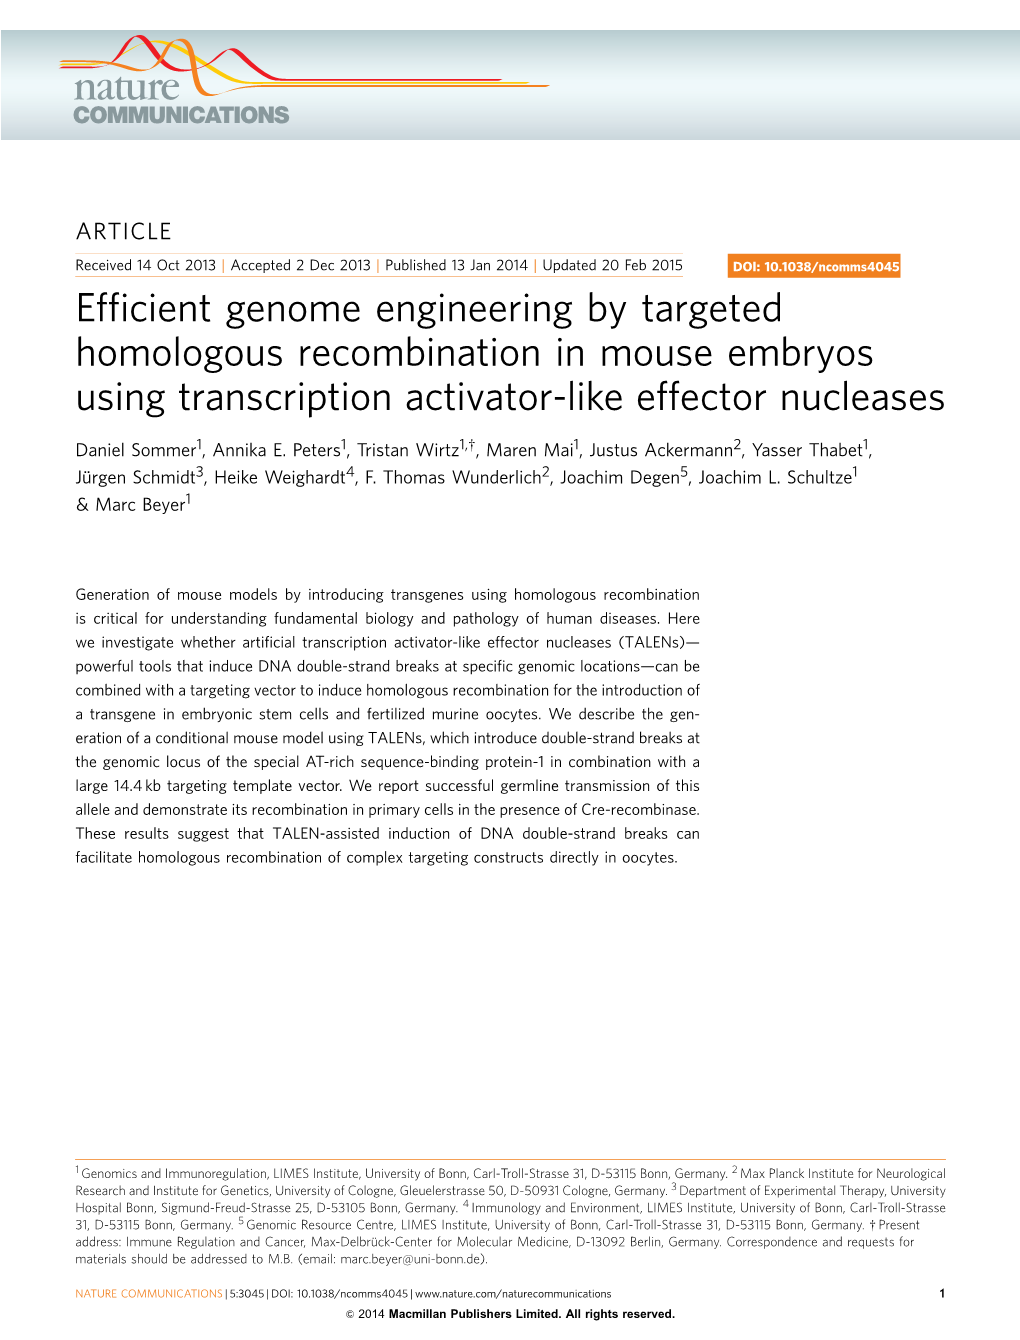 Efficient Genome Engineering by Targeted Homologous